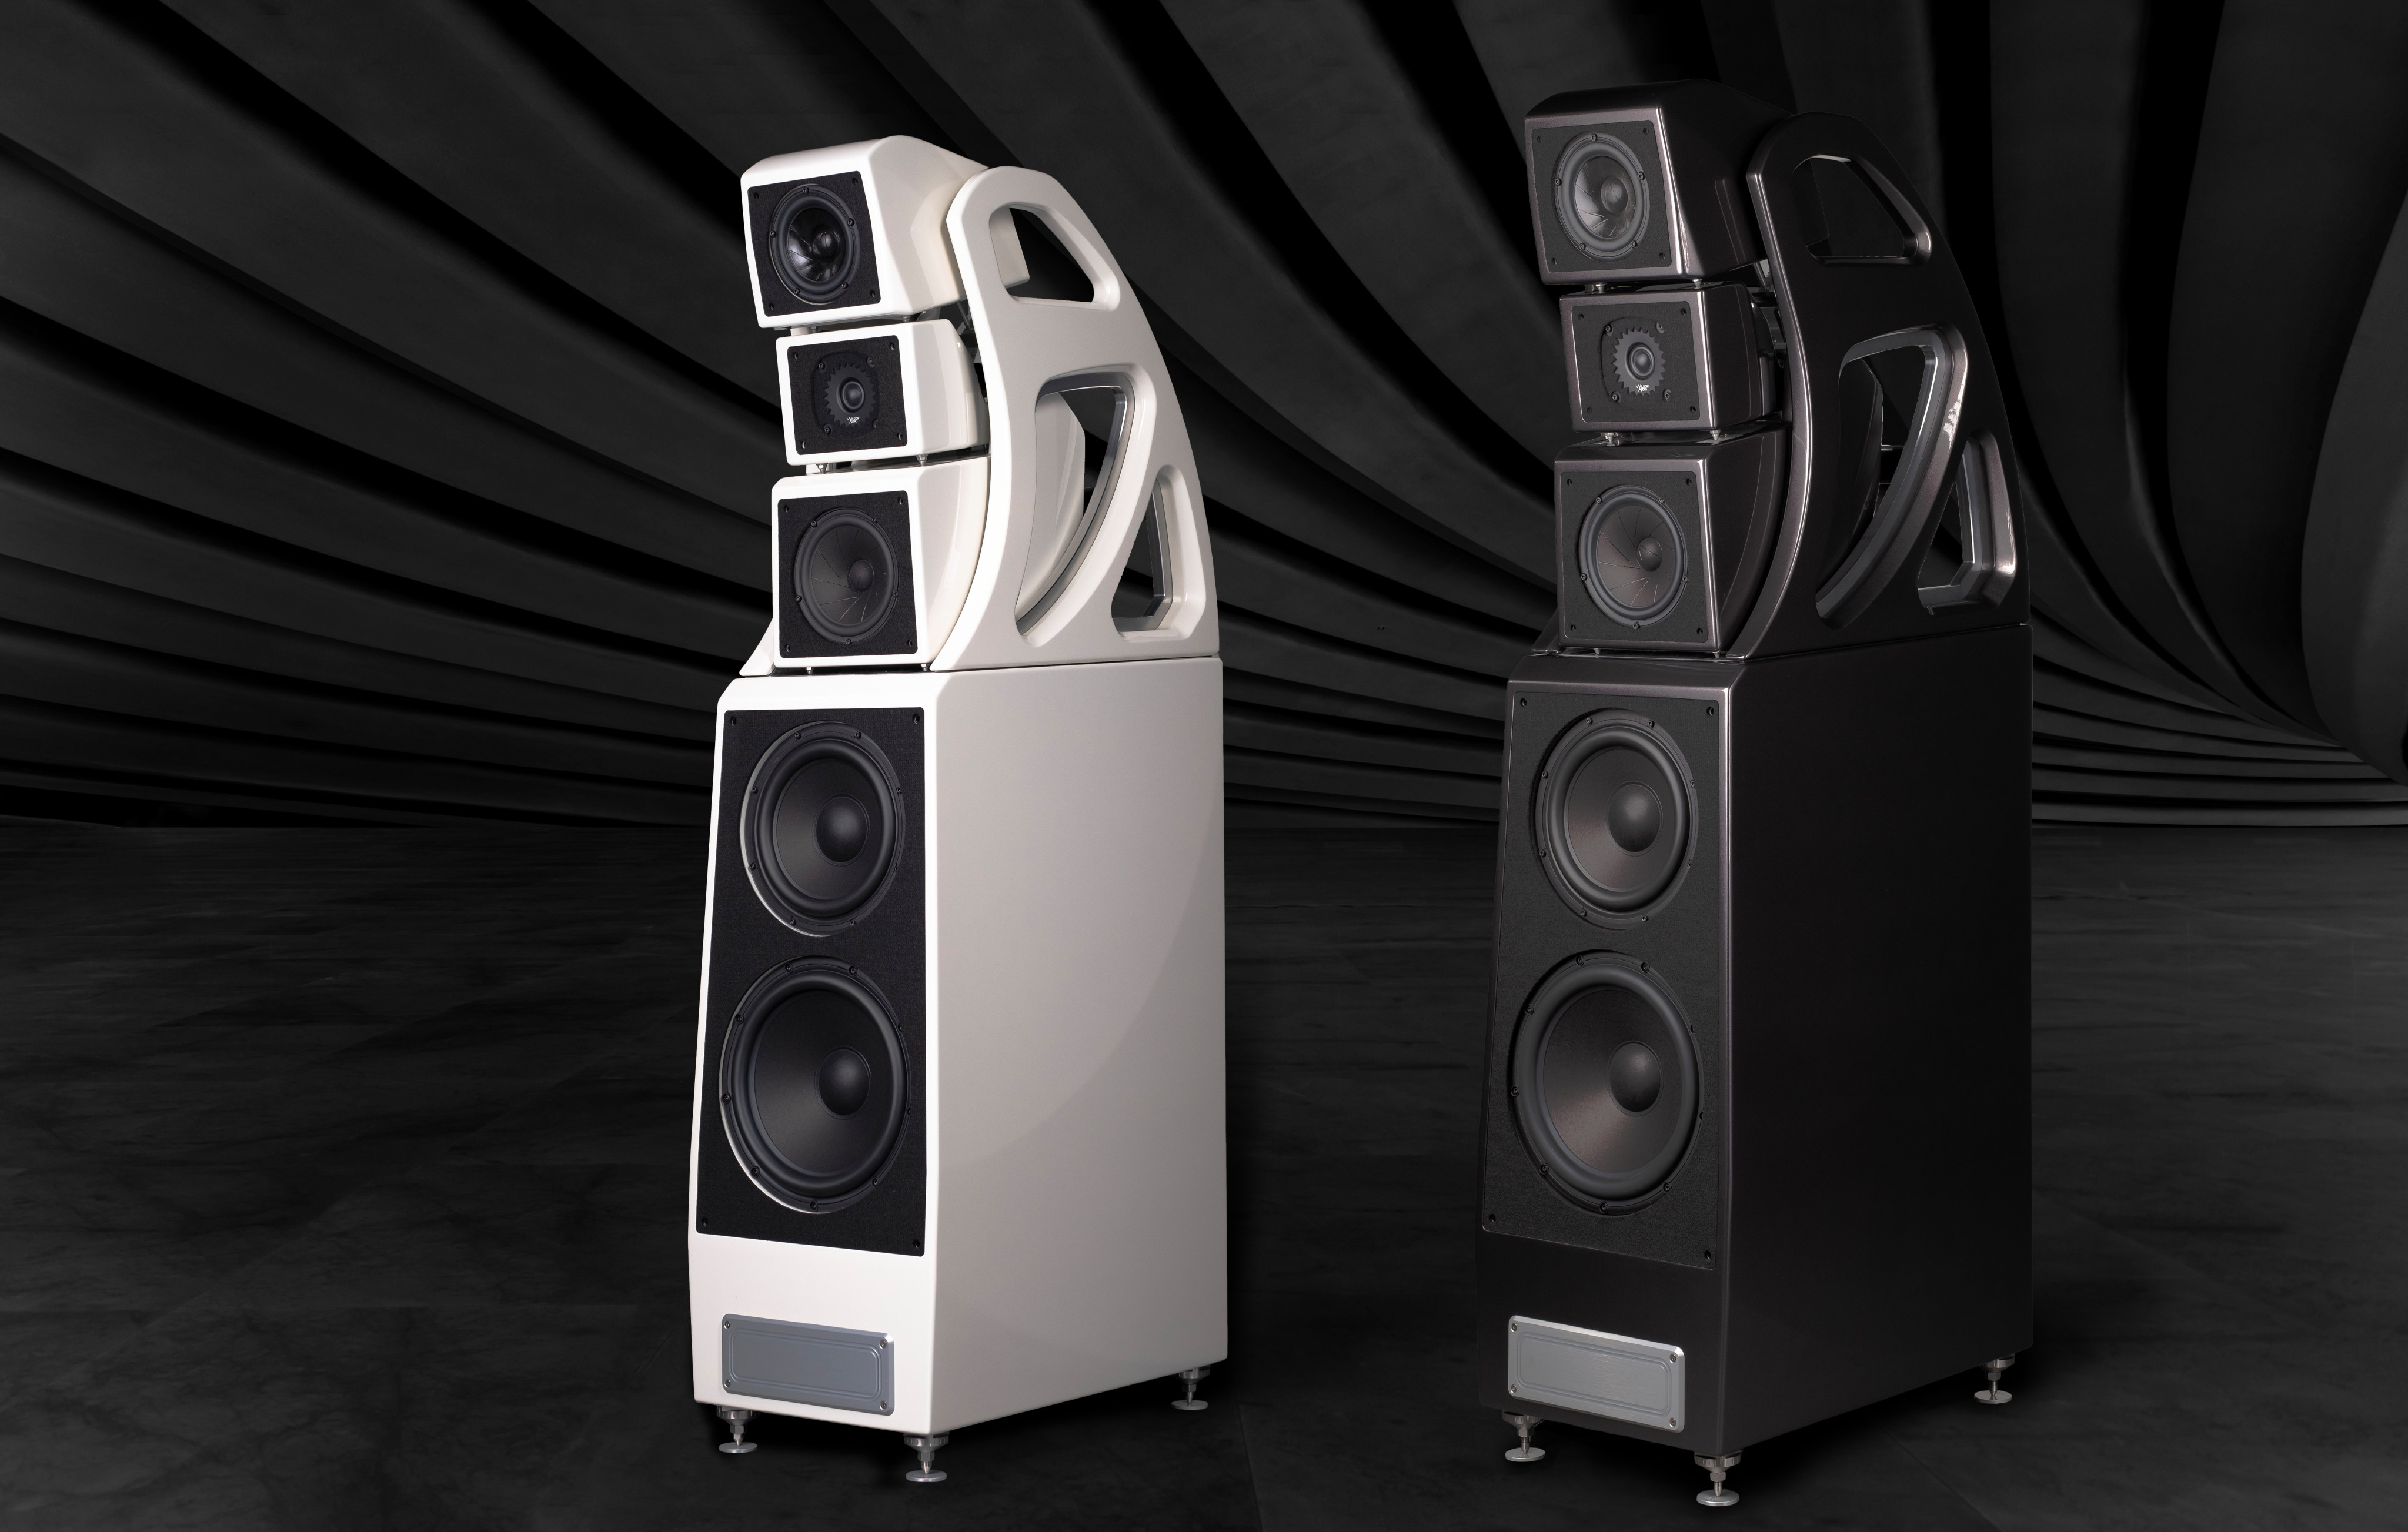 Four pairs of top-of-the-line speakers that are an audiophile’s dream and works of art in their own right. Photo: Wilson Audio